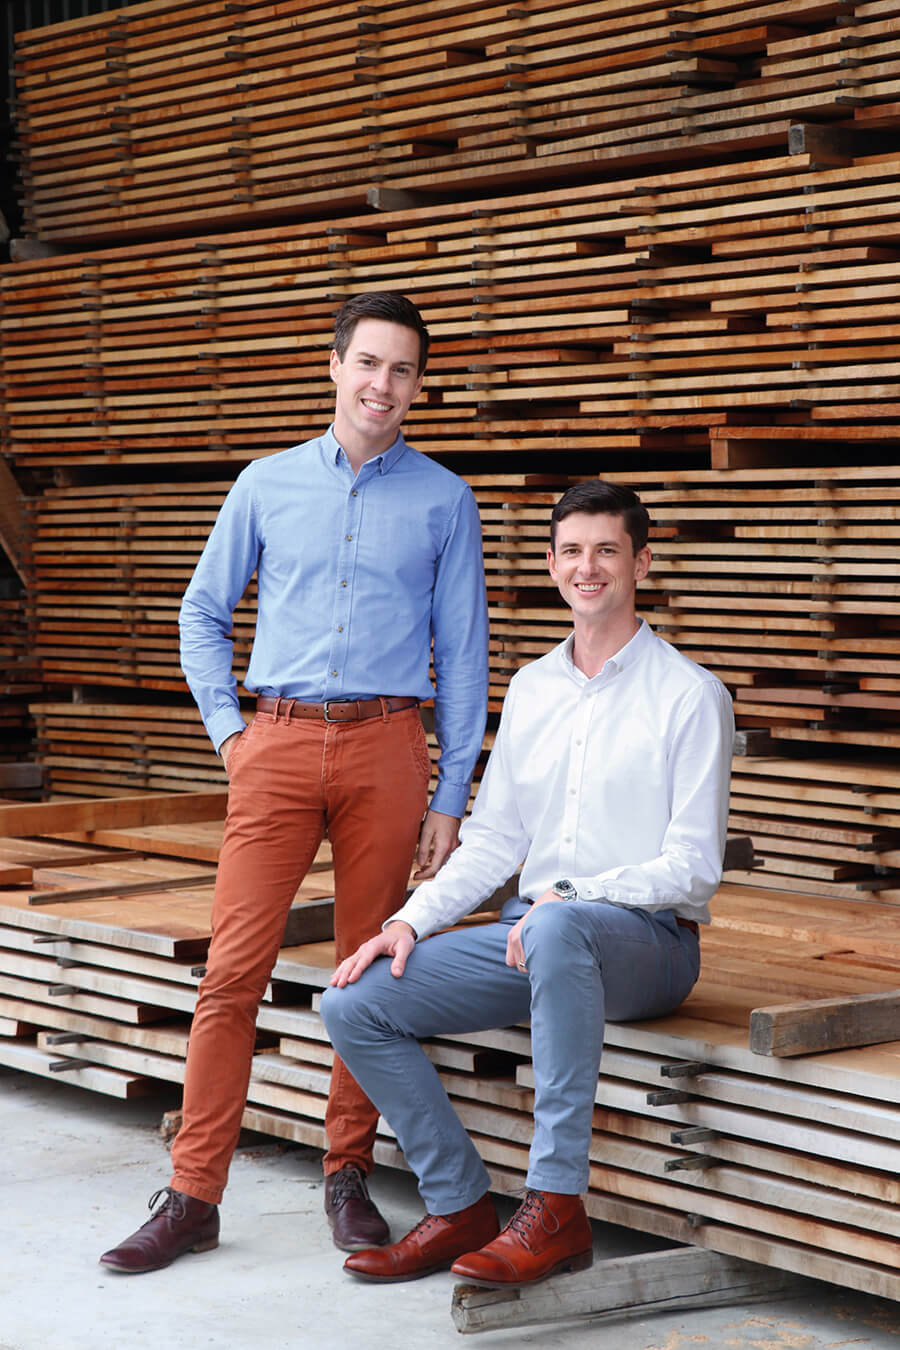 One man standing up and one sitting down in warehouse on wooden pallets